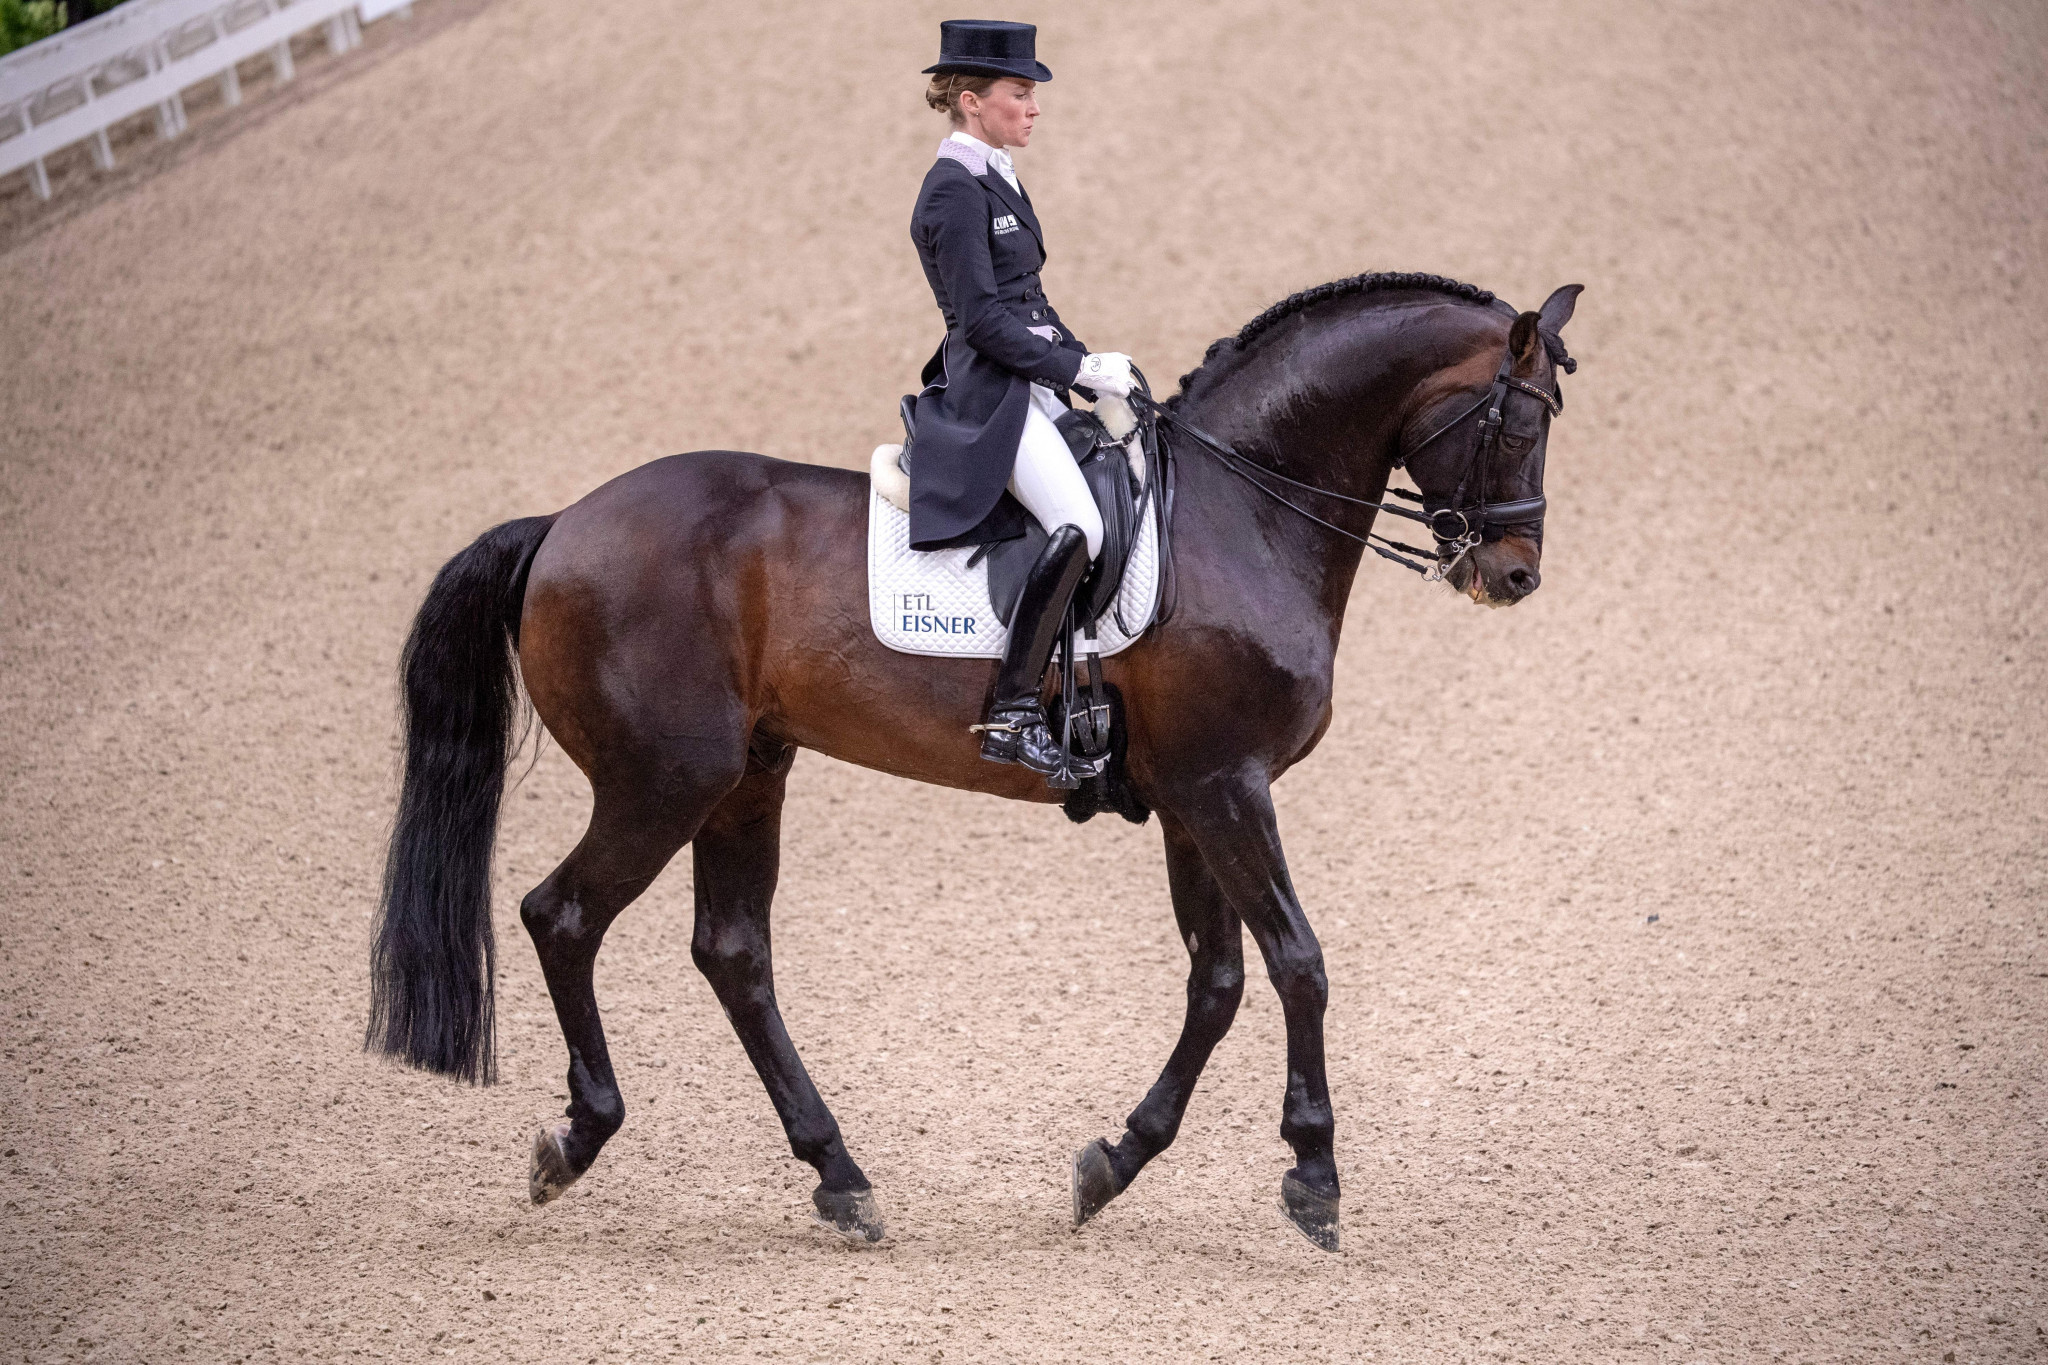 Helen Langehanenberg, Germany's former World Equestrian Games individual silver medallist, is among those due to compete this weeknend at the FEI Dressage Nations Cup at Compiègne, in France ©FEI